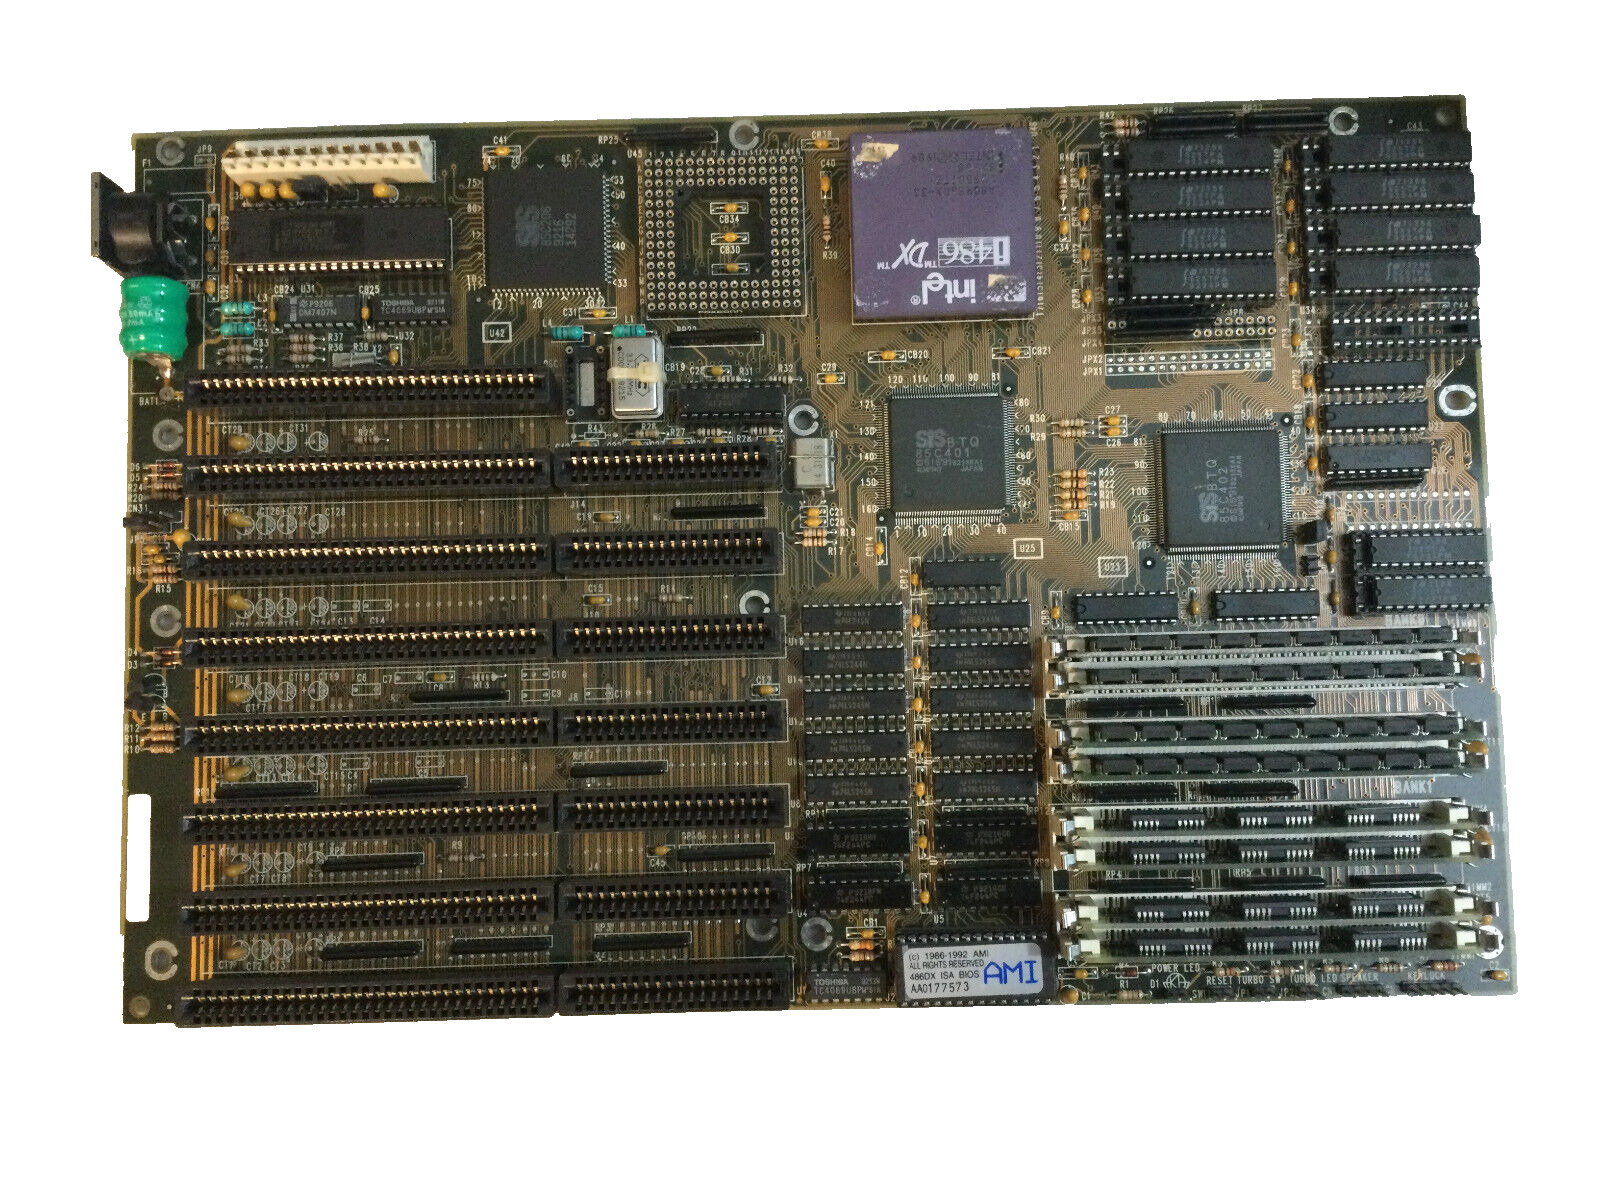 UNTESTED - Vintage 486 Motherboard with Intel 486DX-33 CPU Processor i486